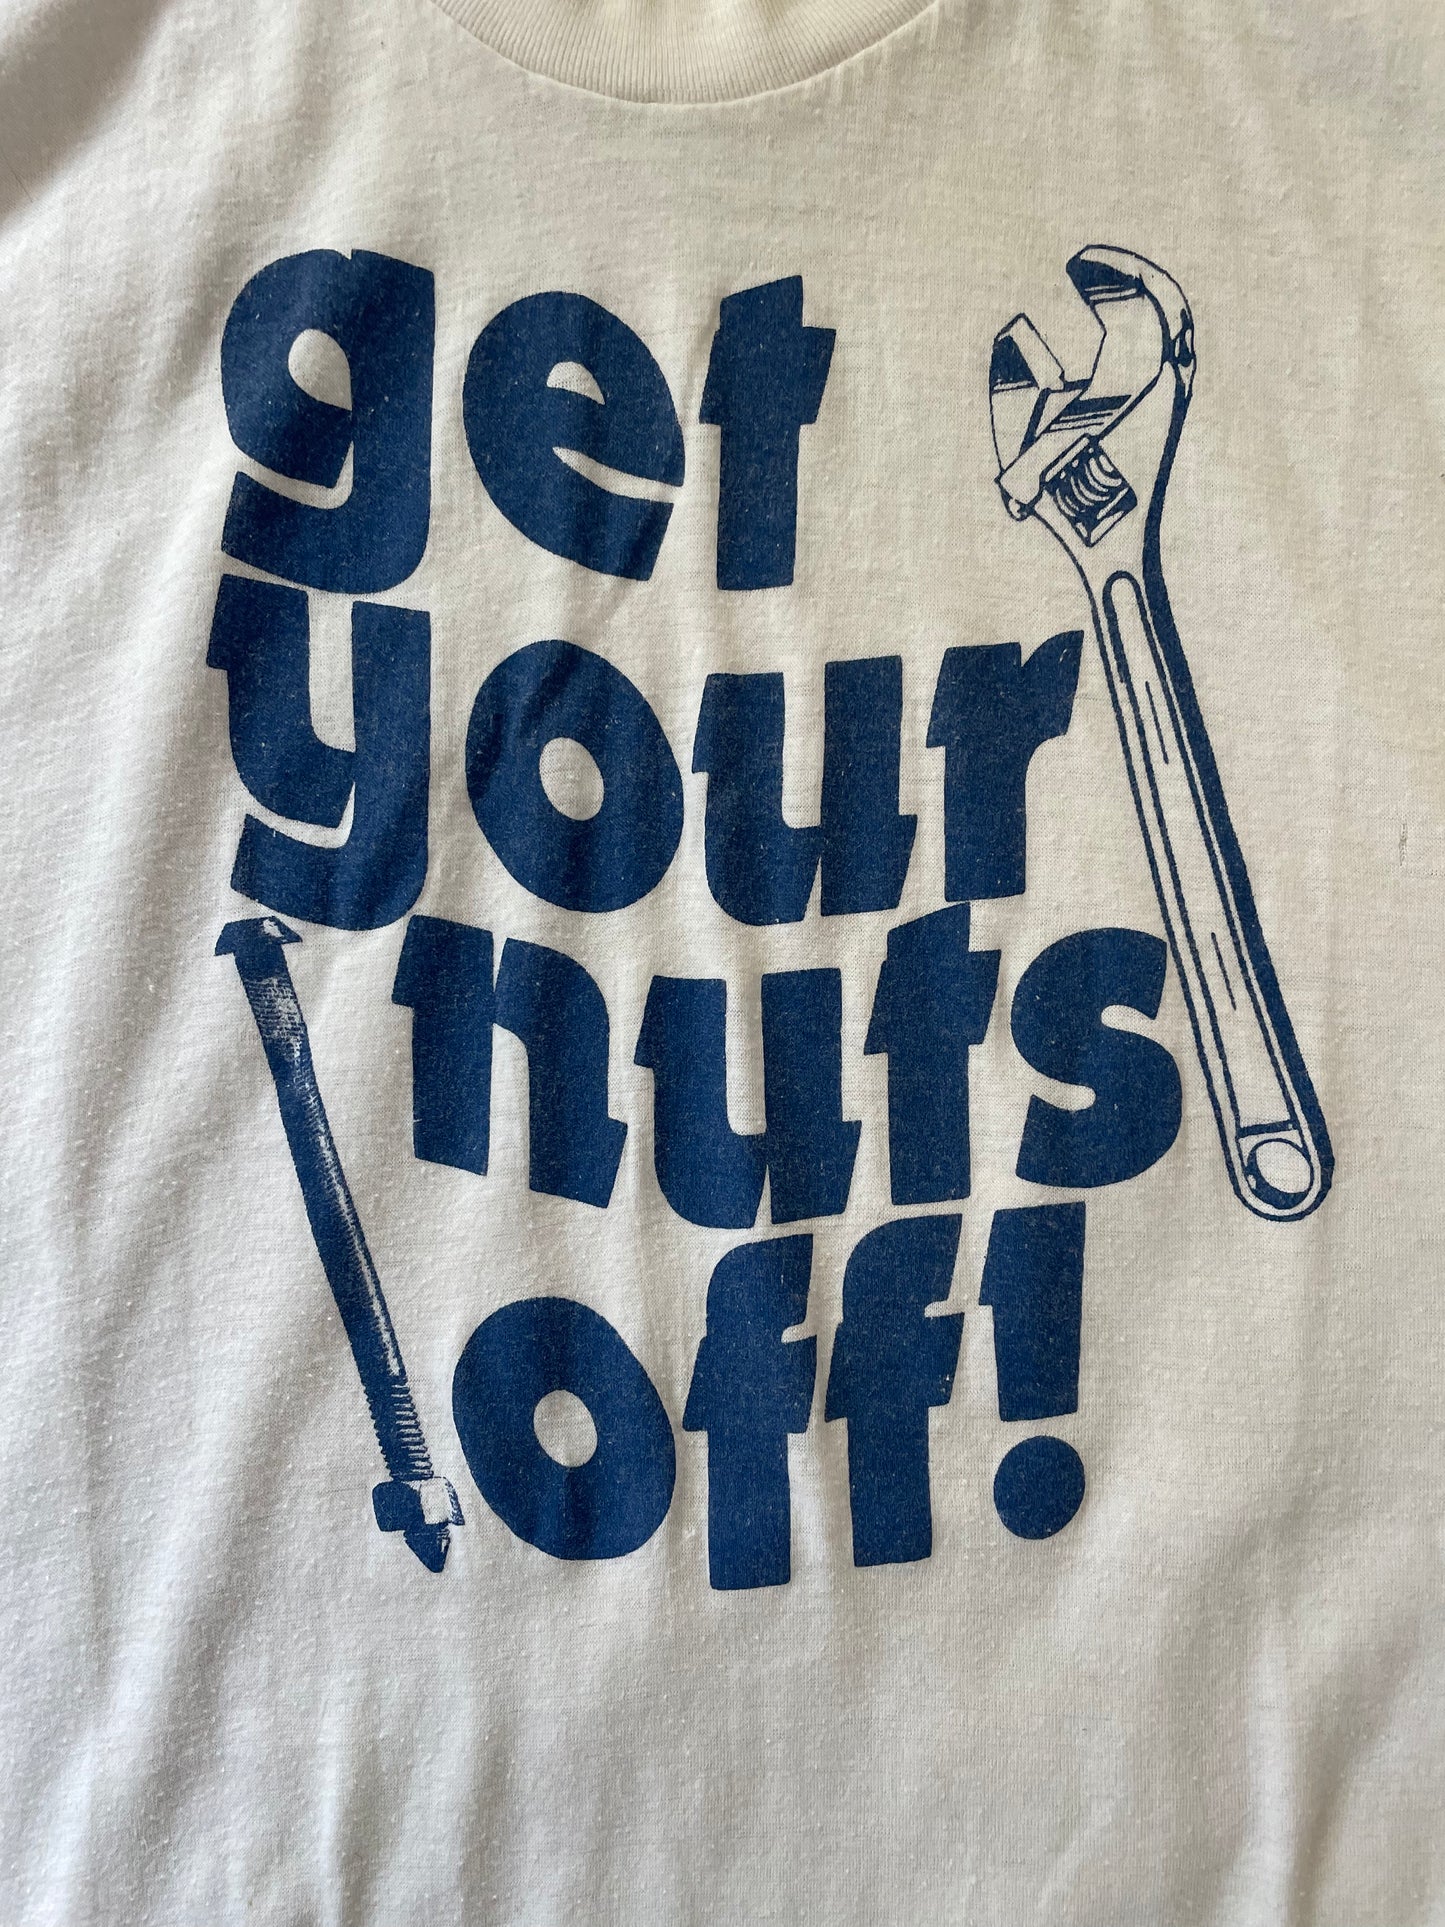 70s/80s Get Your Nuts Off! Tee